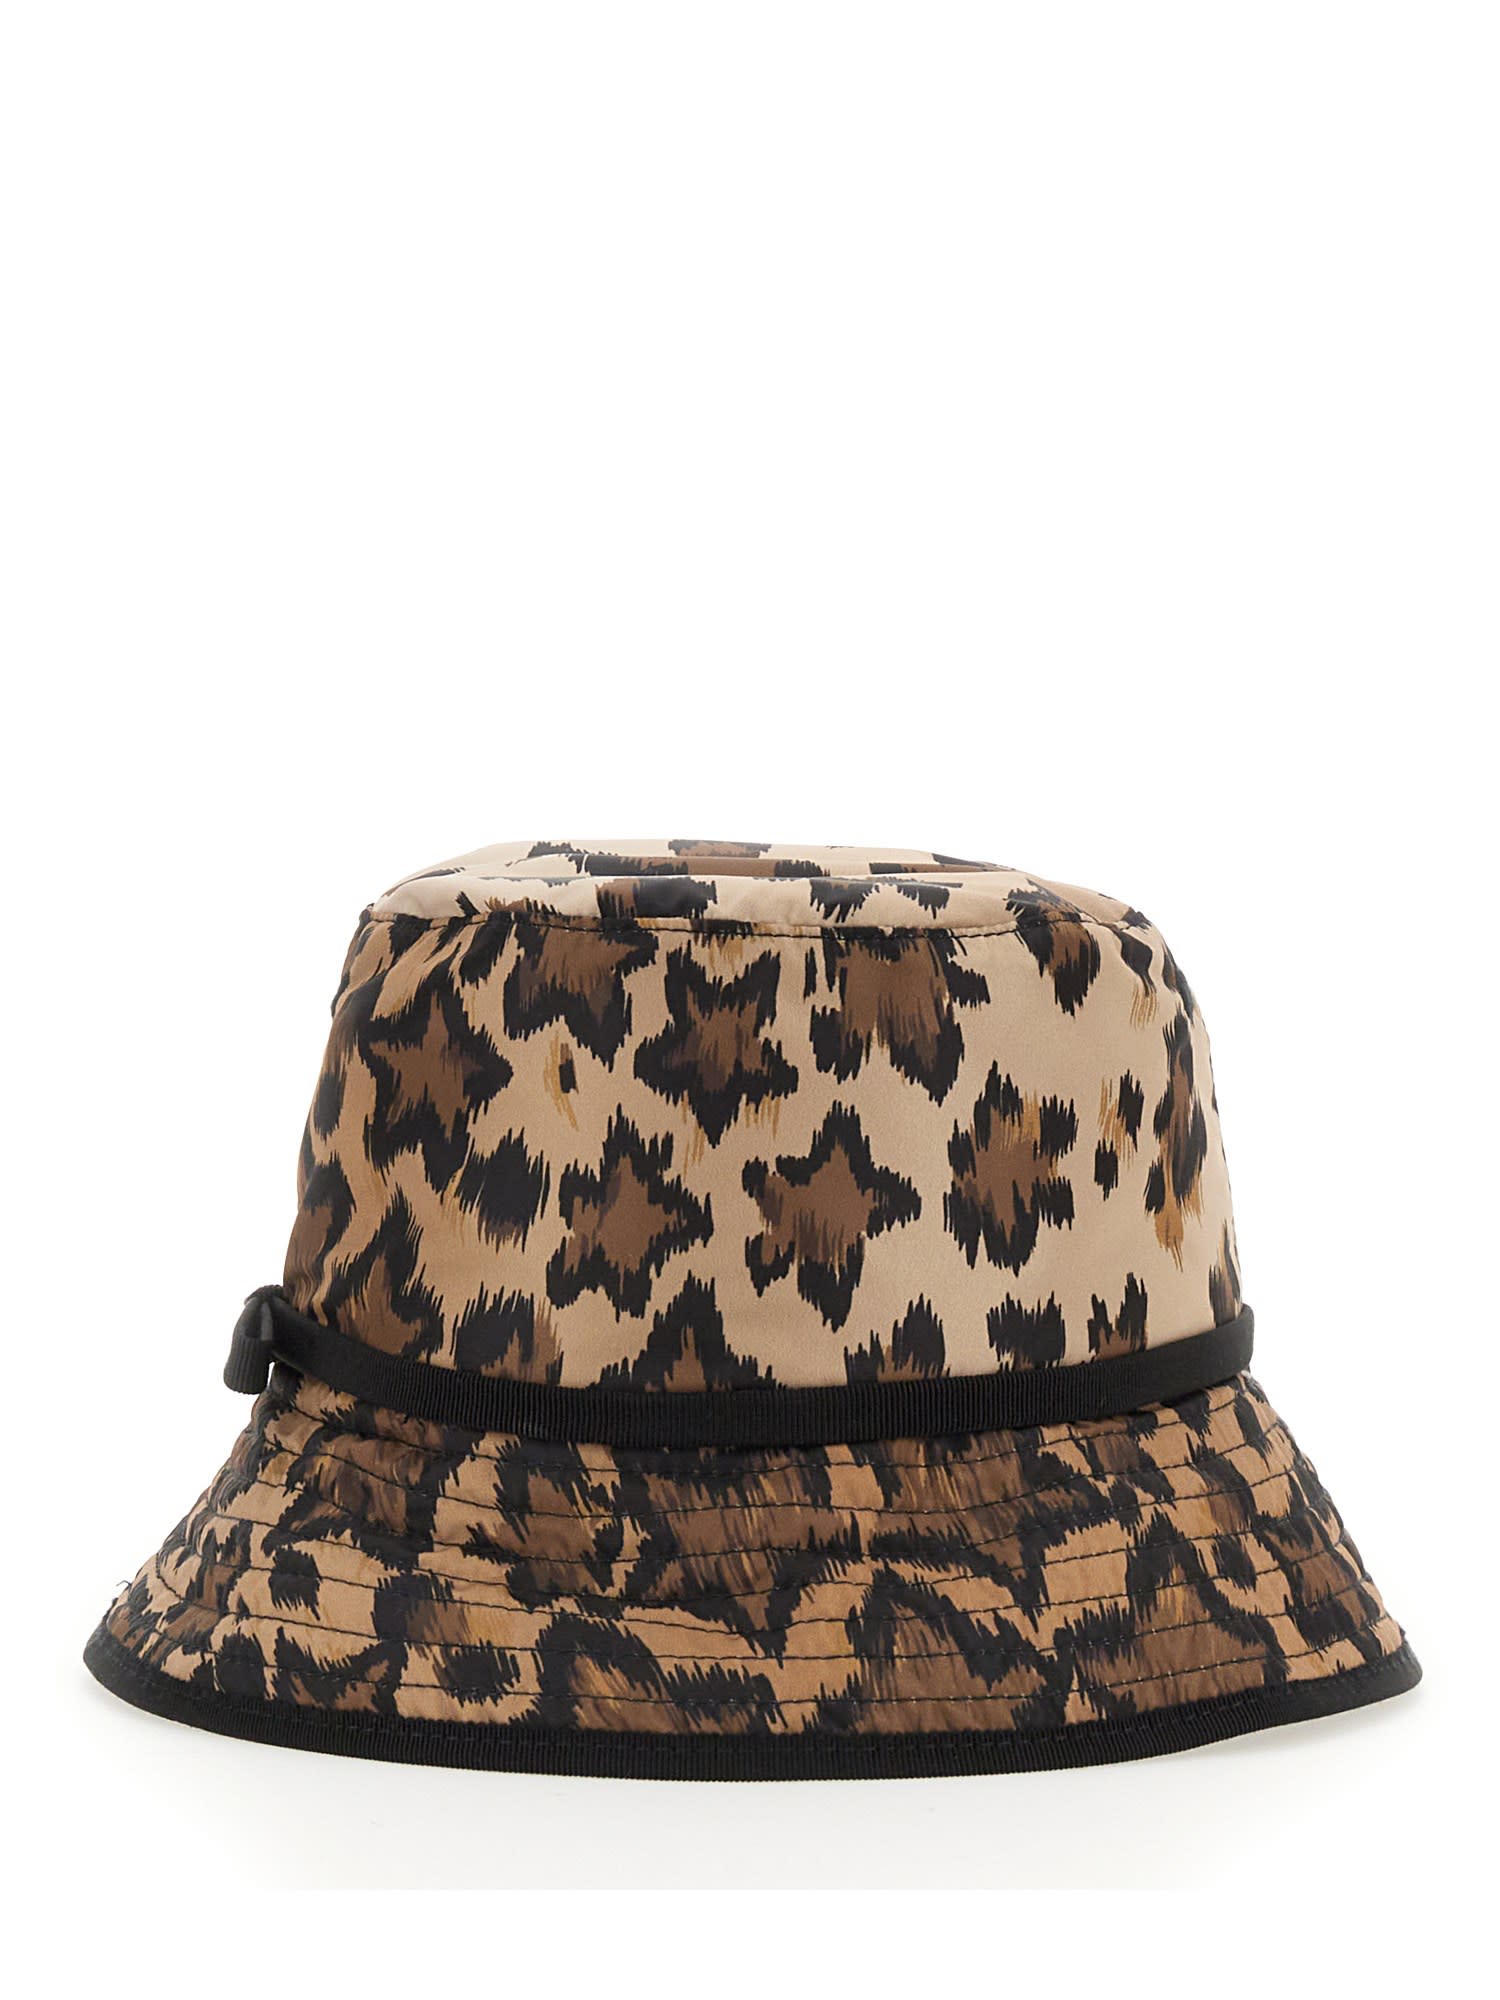 RED Valentino Bucket Hat With Leo Print